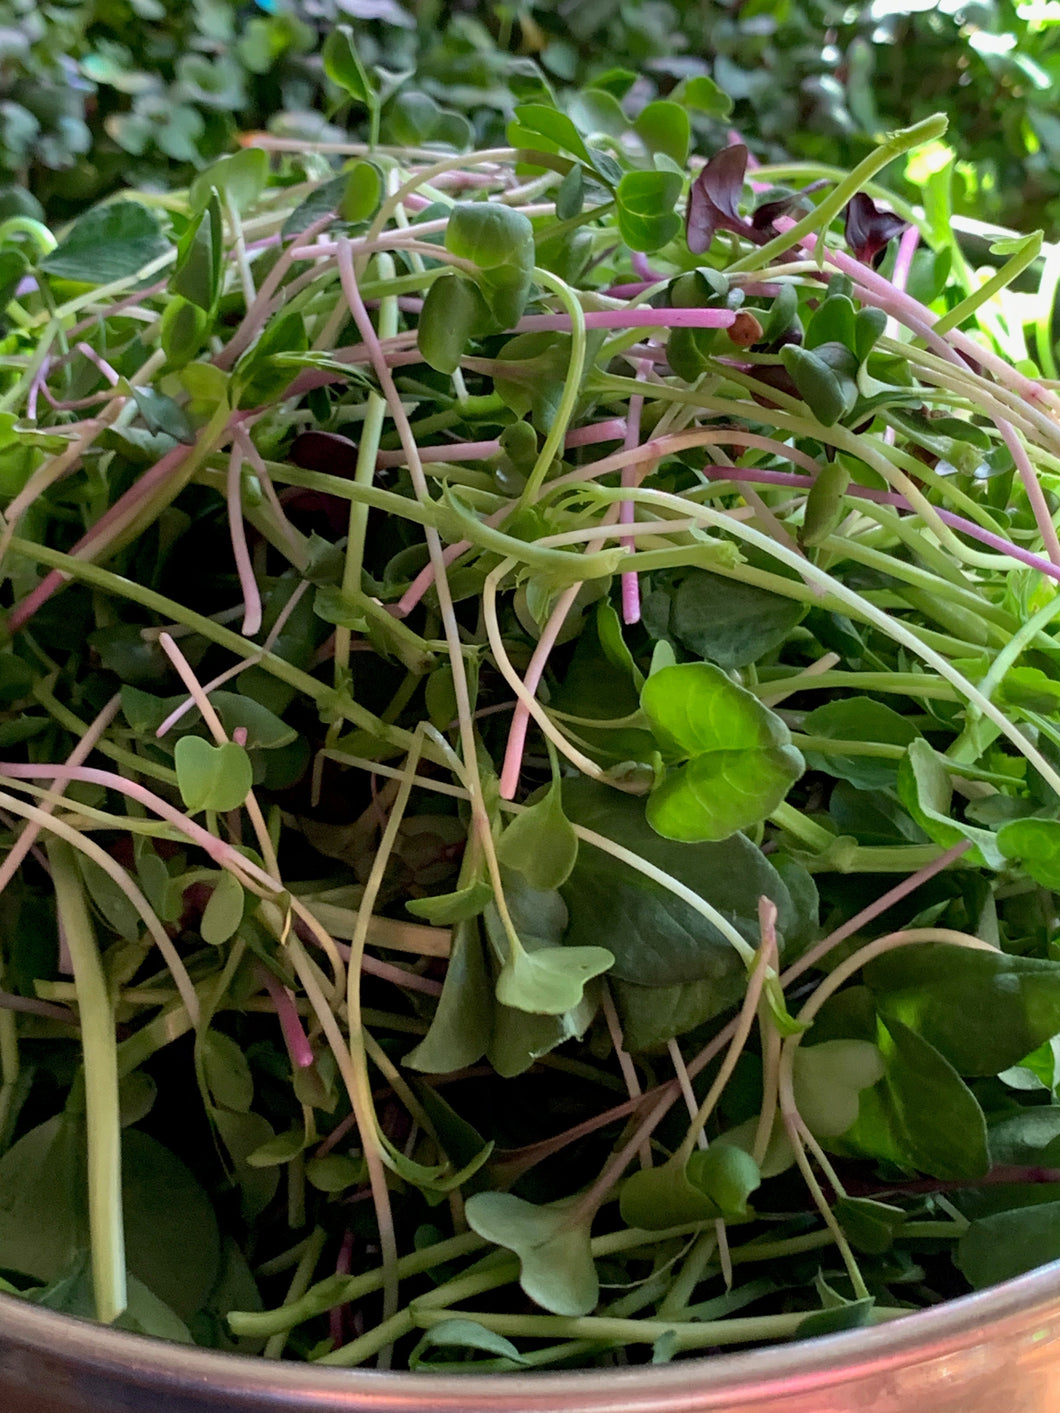 Option B - Free Climb CSA Membership - Stress Buster Microgreen Salad Mix - 3 oz container - You can add this item to any CSA membership or order it alone - Meadowsweet Gifts & Wellness, Morrison, CO - Pick-Up Spot <br> This is our most popular item!